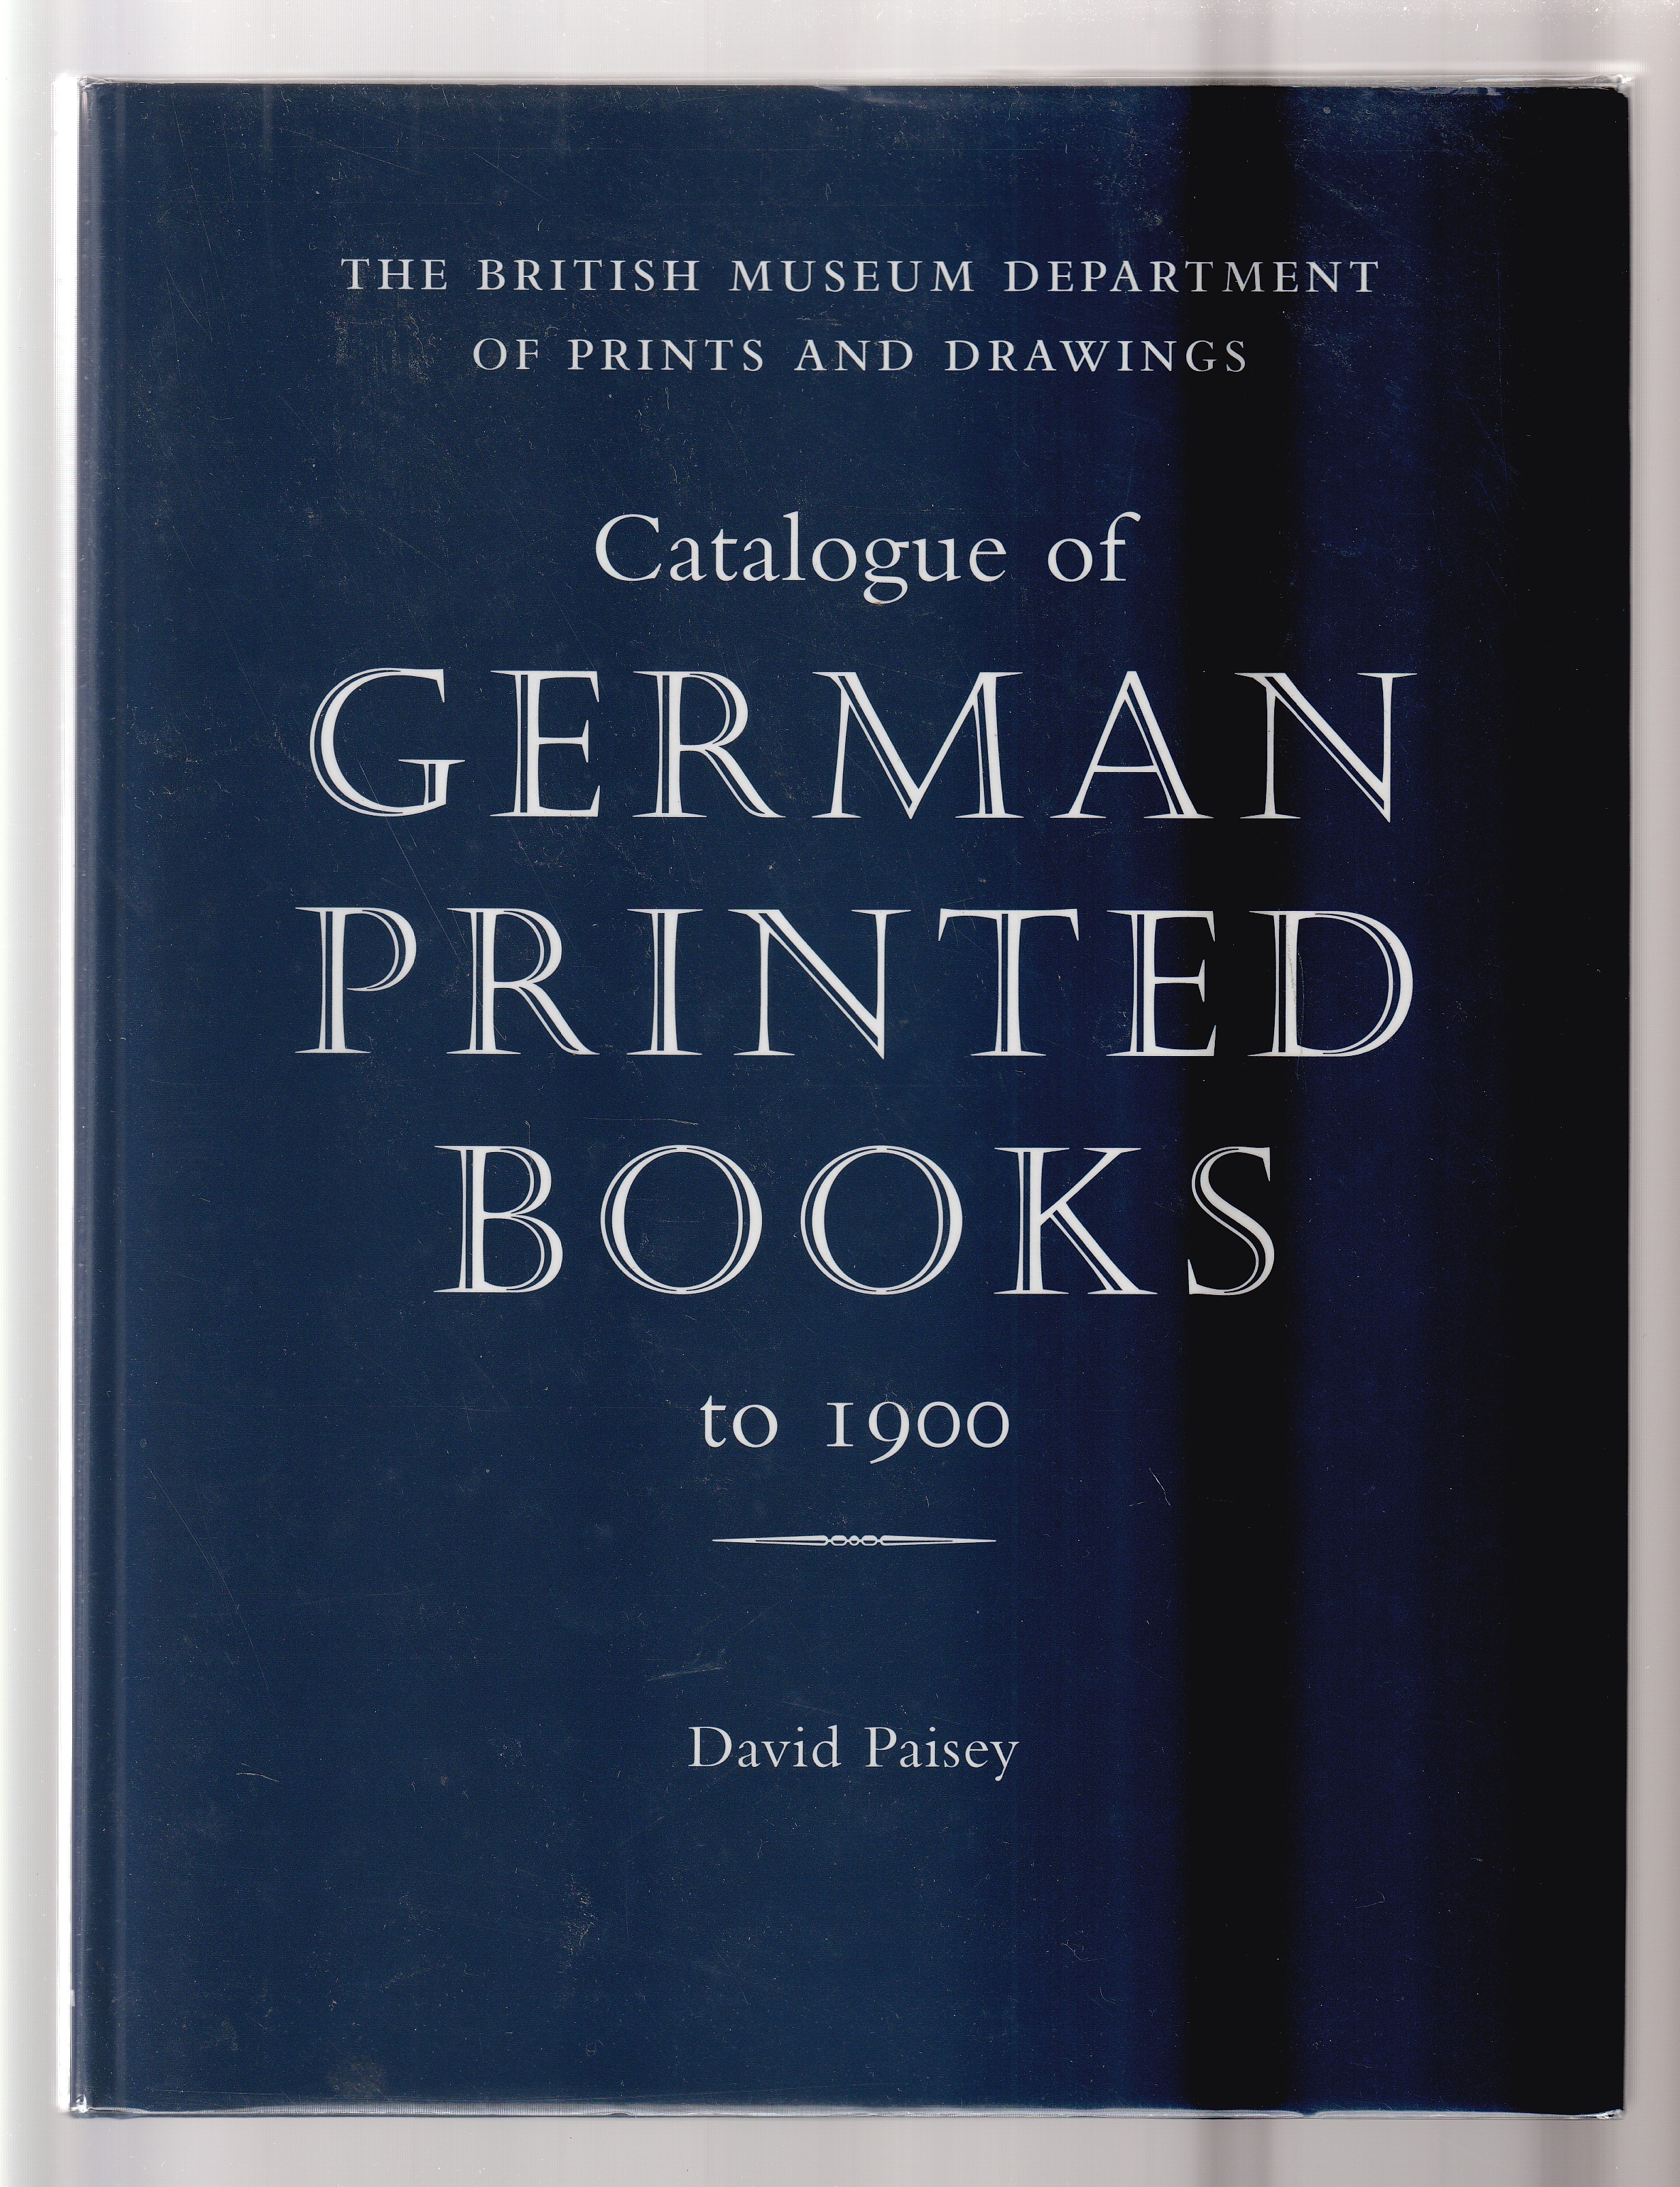 Catalogue of German Printed Books to 1900. The British Museum Department of Prints and Drawings. - PAISEY, David